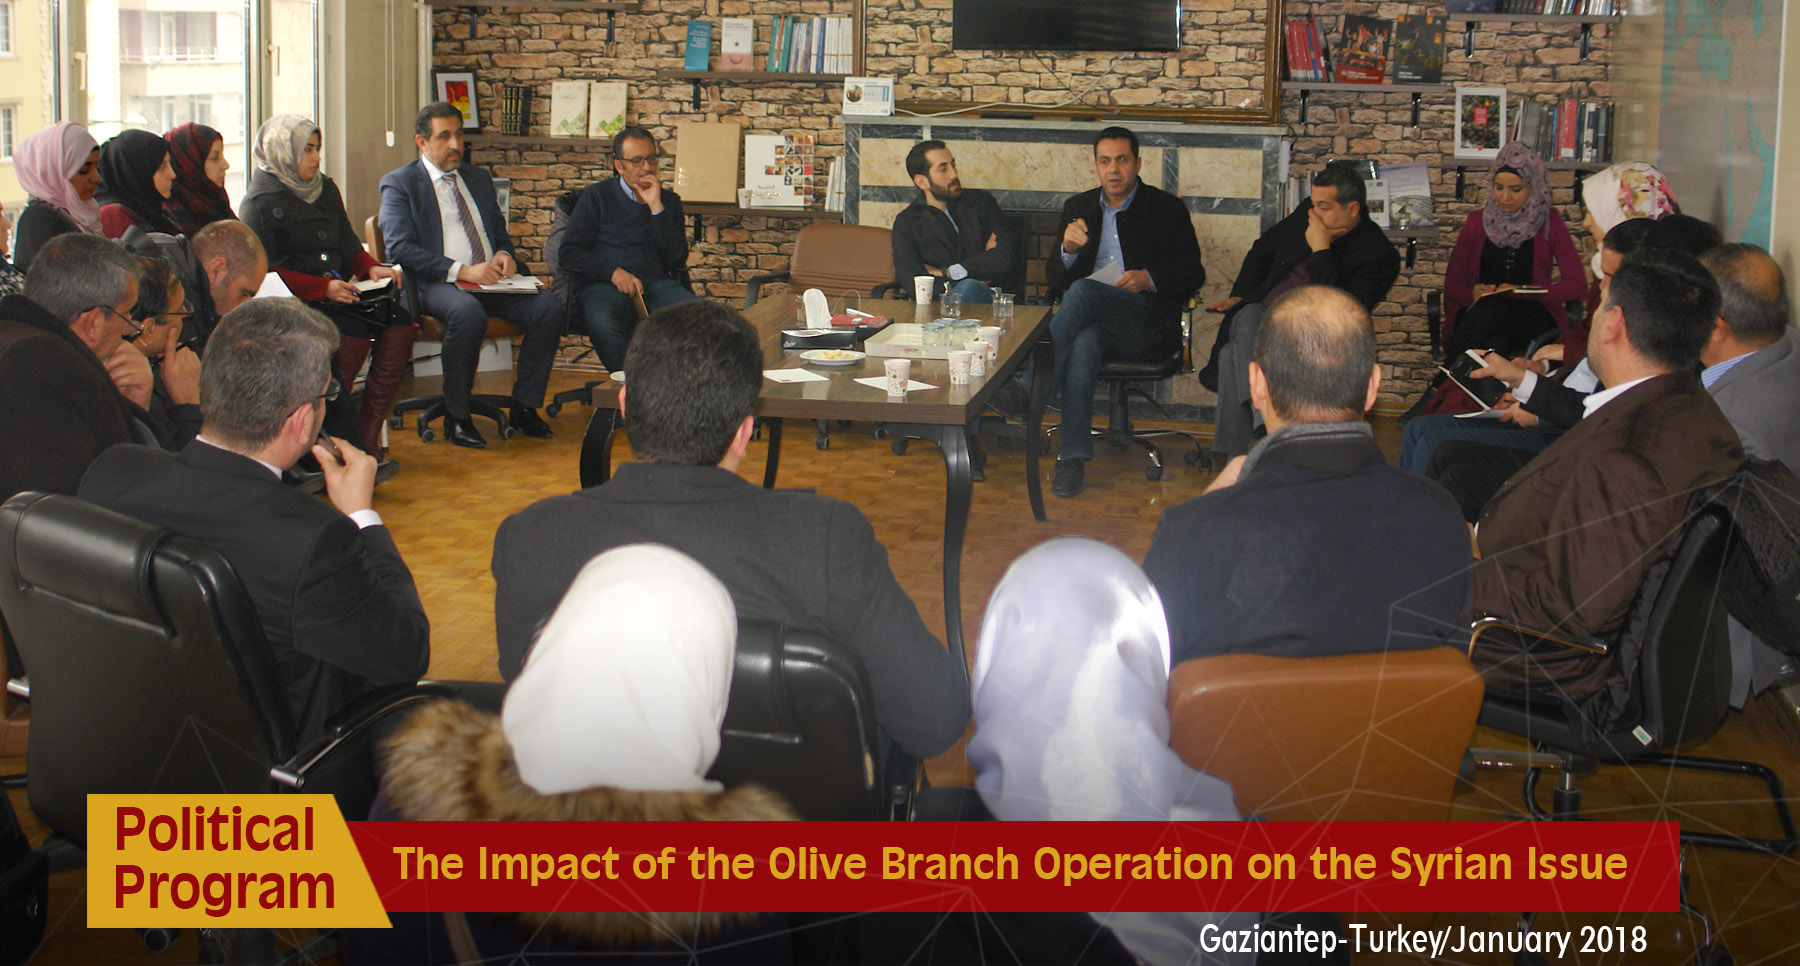 The Impact of the Olive Branch Operation on the Syrian Issue